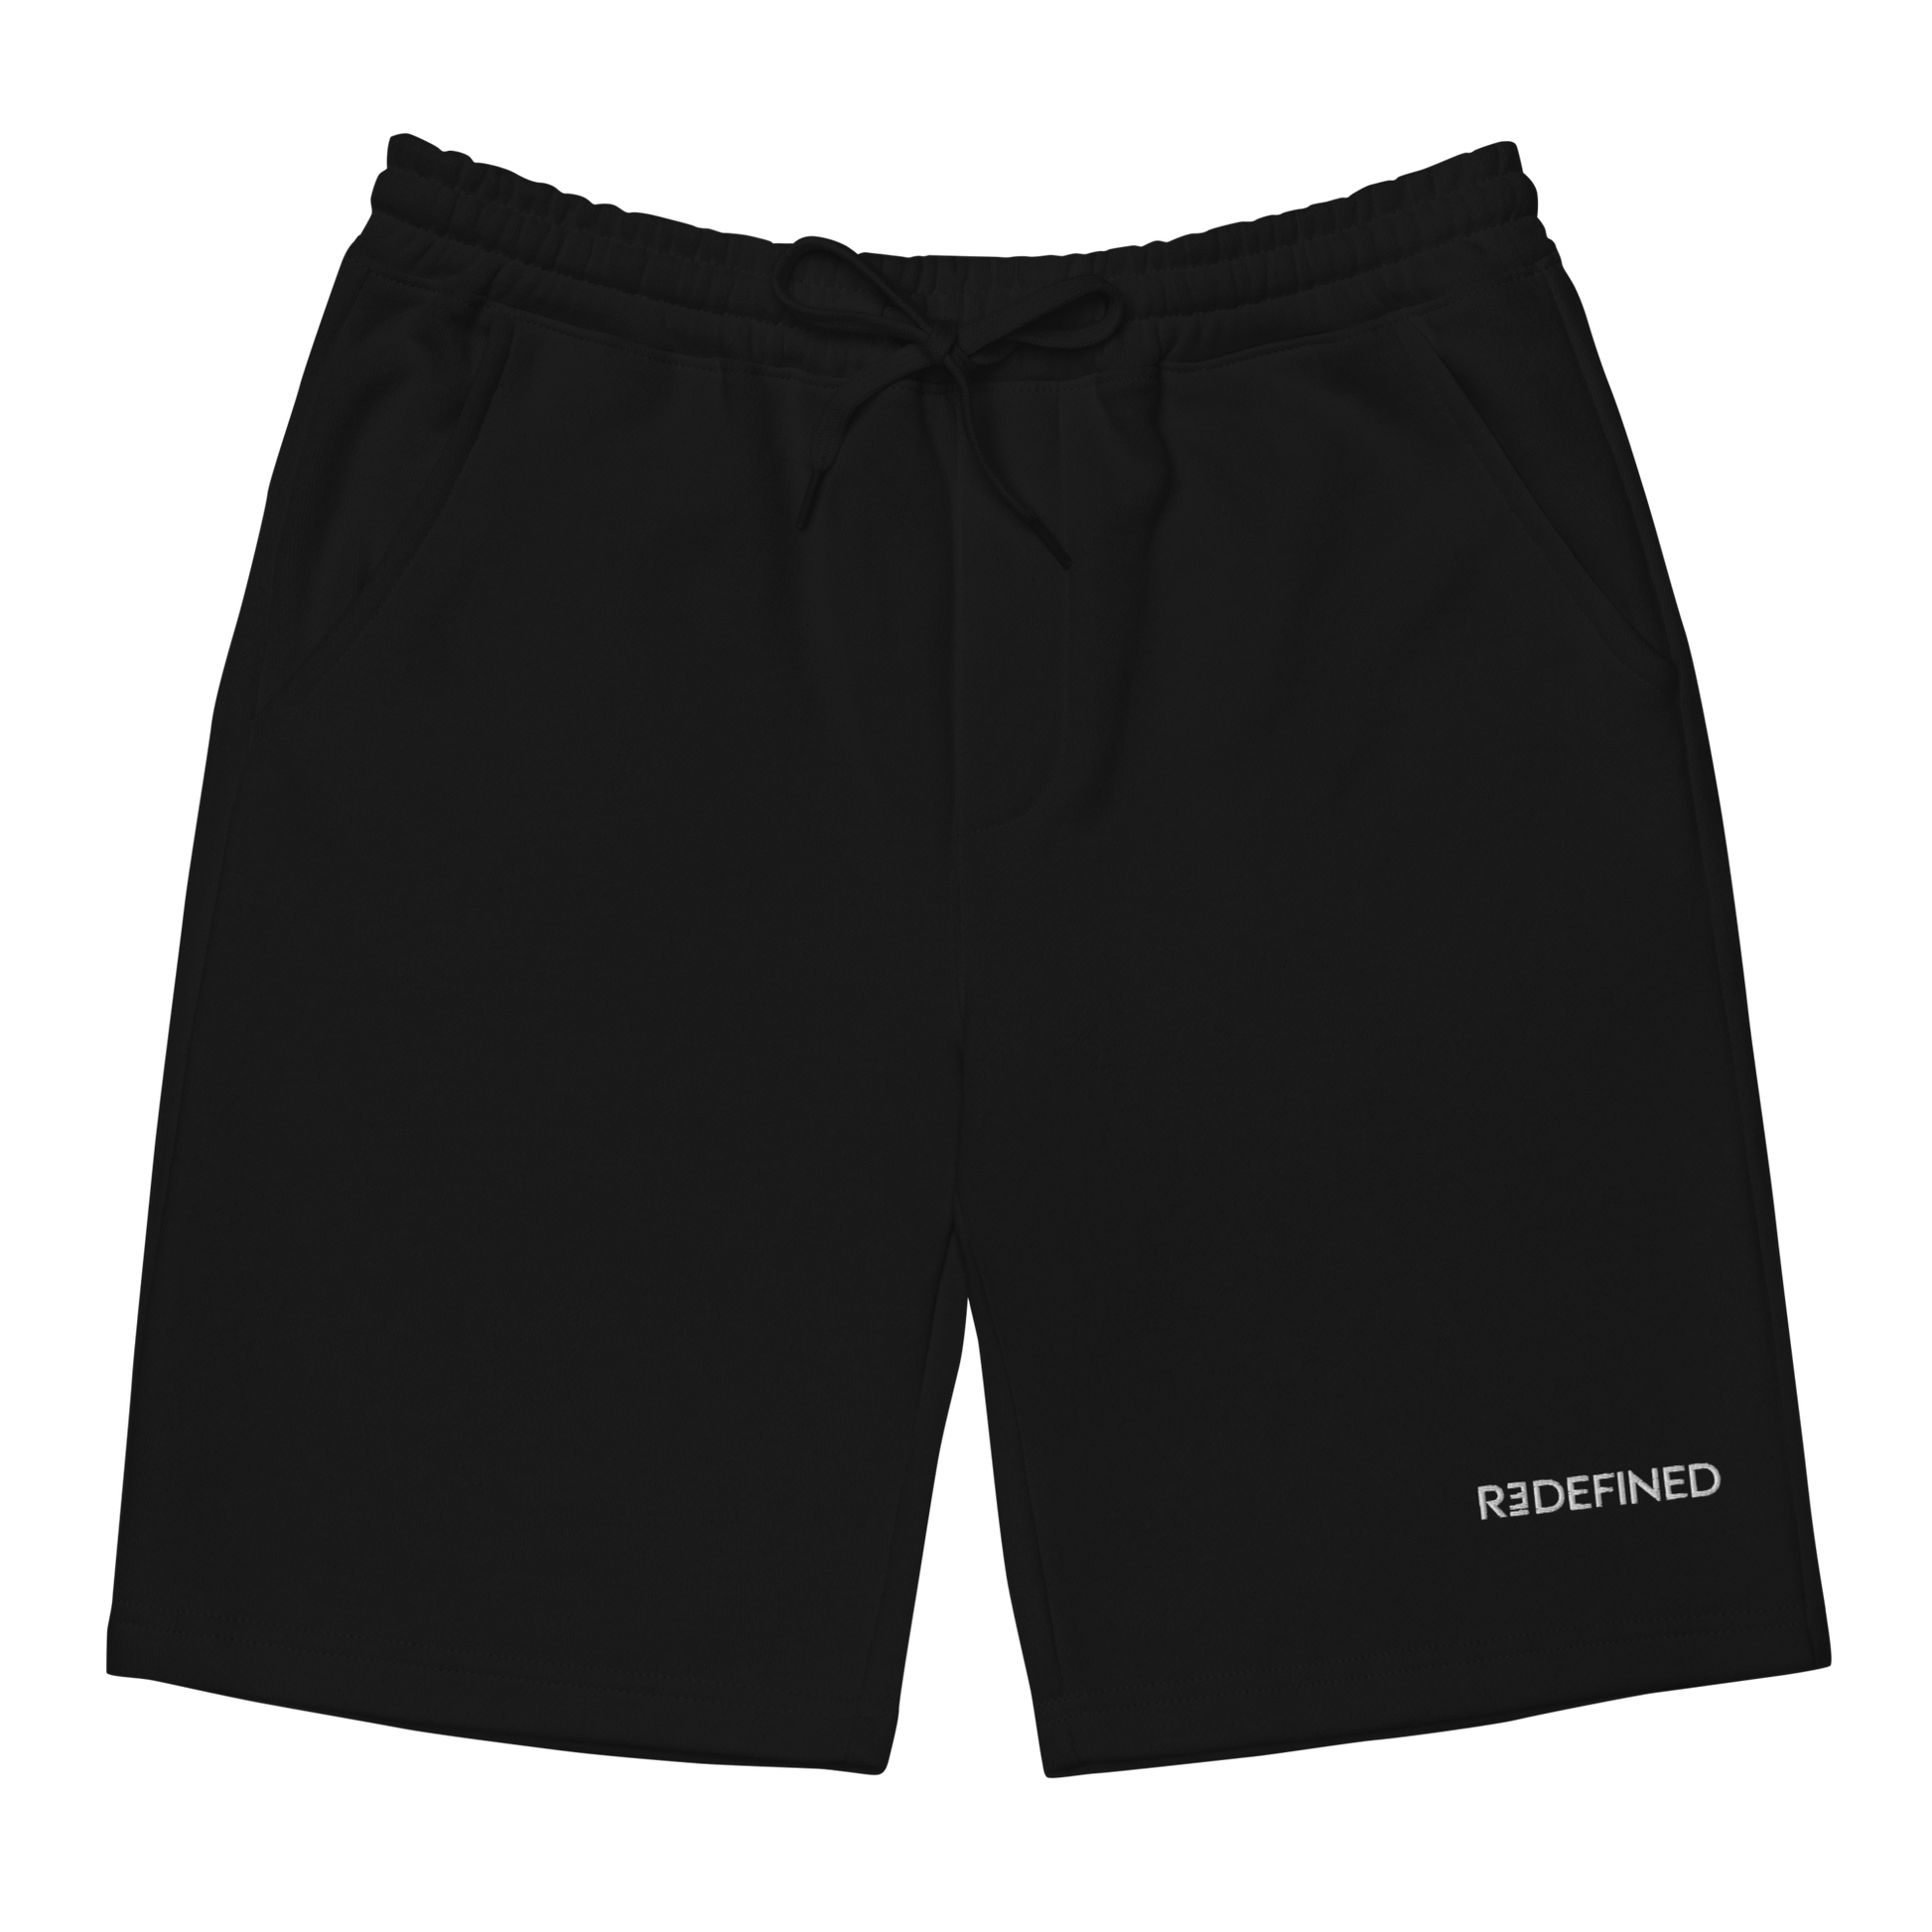 Classic Redefined Embroidered Shorts - Redefined